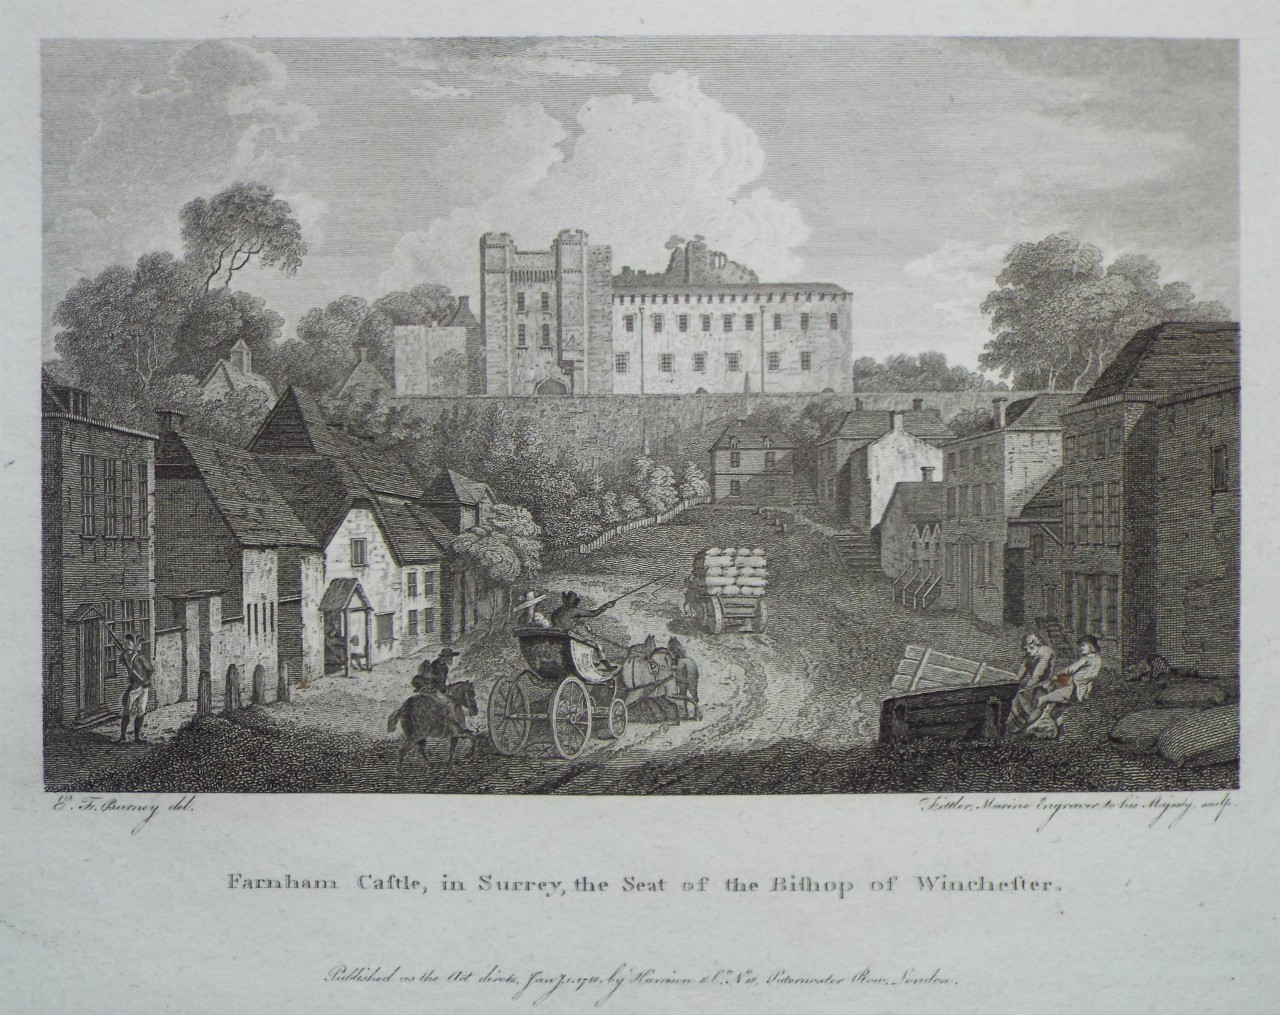 Print - Farnham Castle, in Surrey, the Seat of the Bishop of Winchester. - 